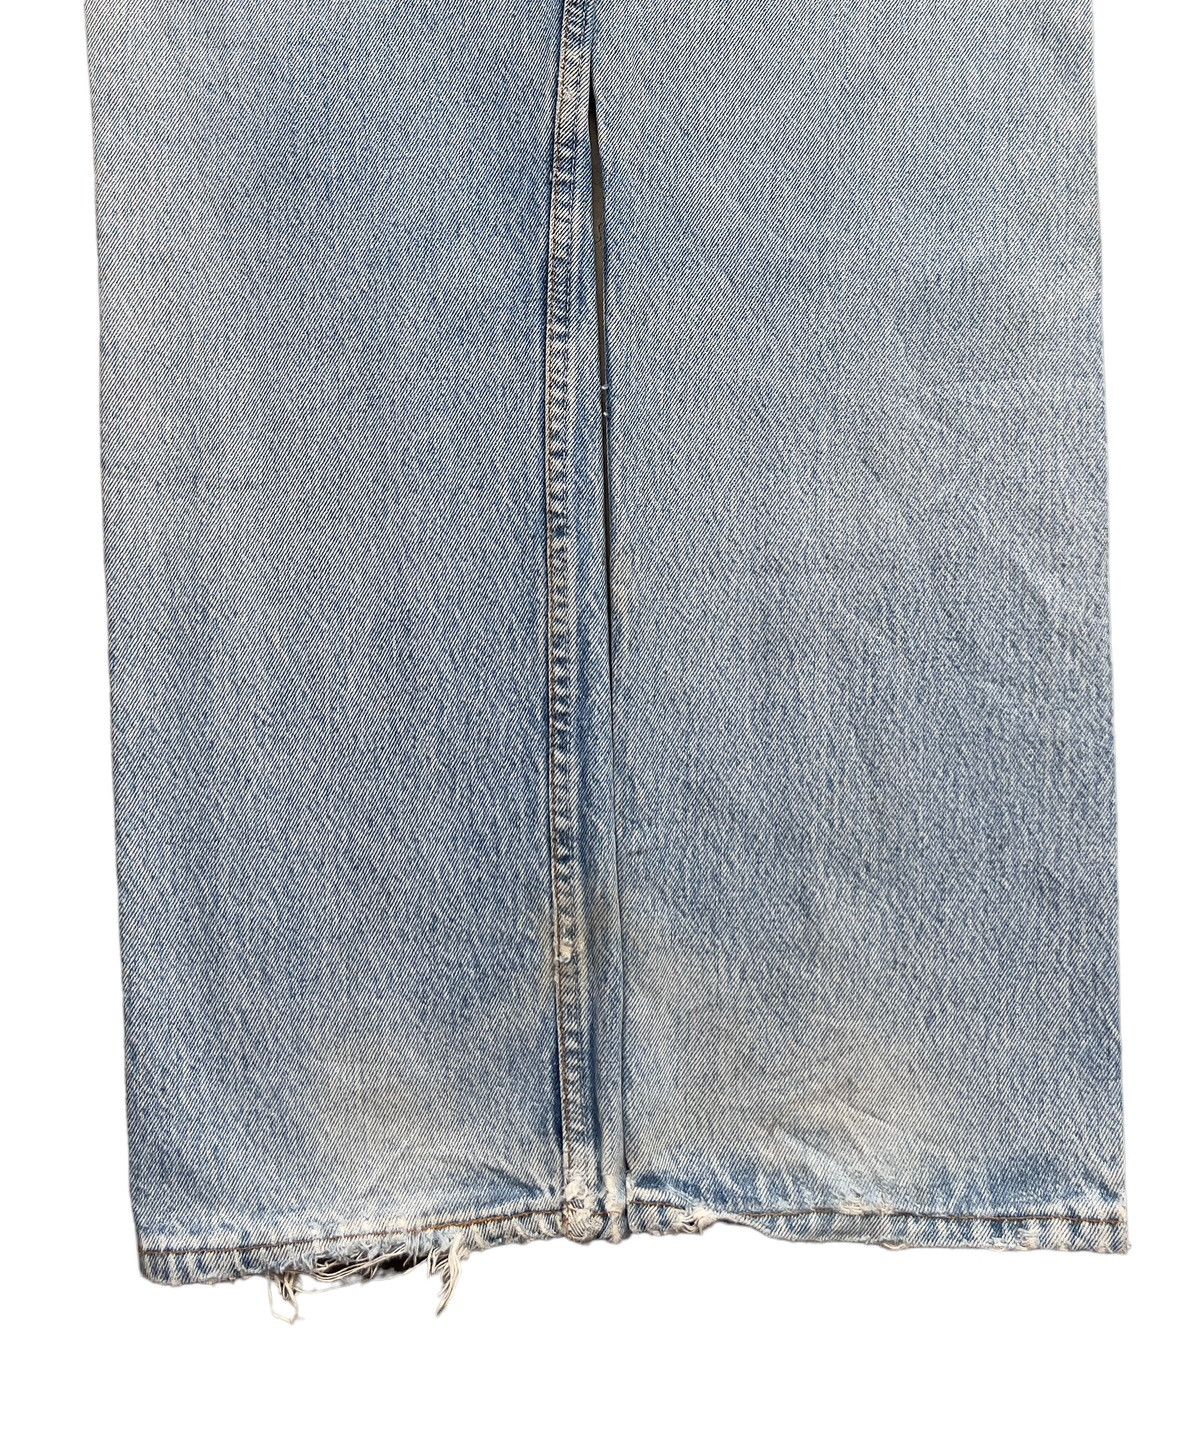 Vintage 90s Levis Distressed Ripped Acid Wash Jeans 31x32 - 6